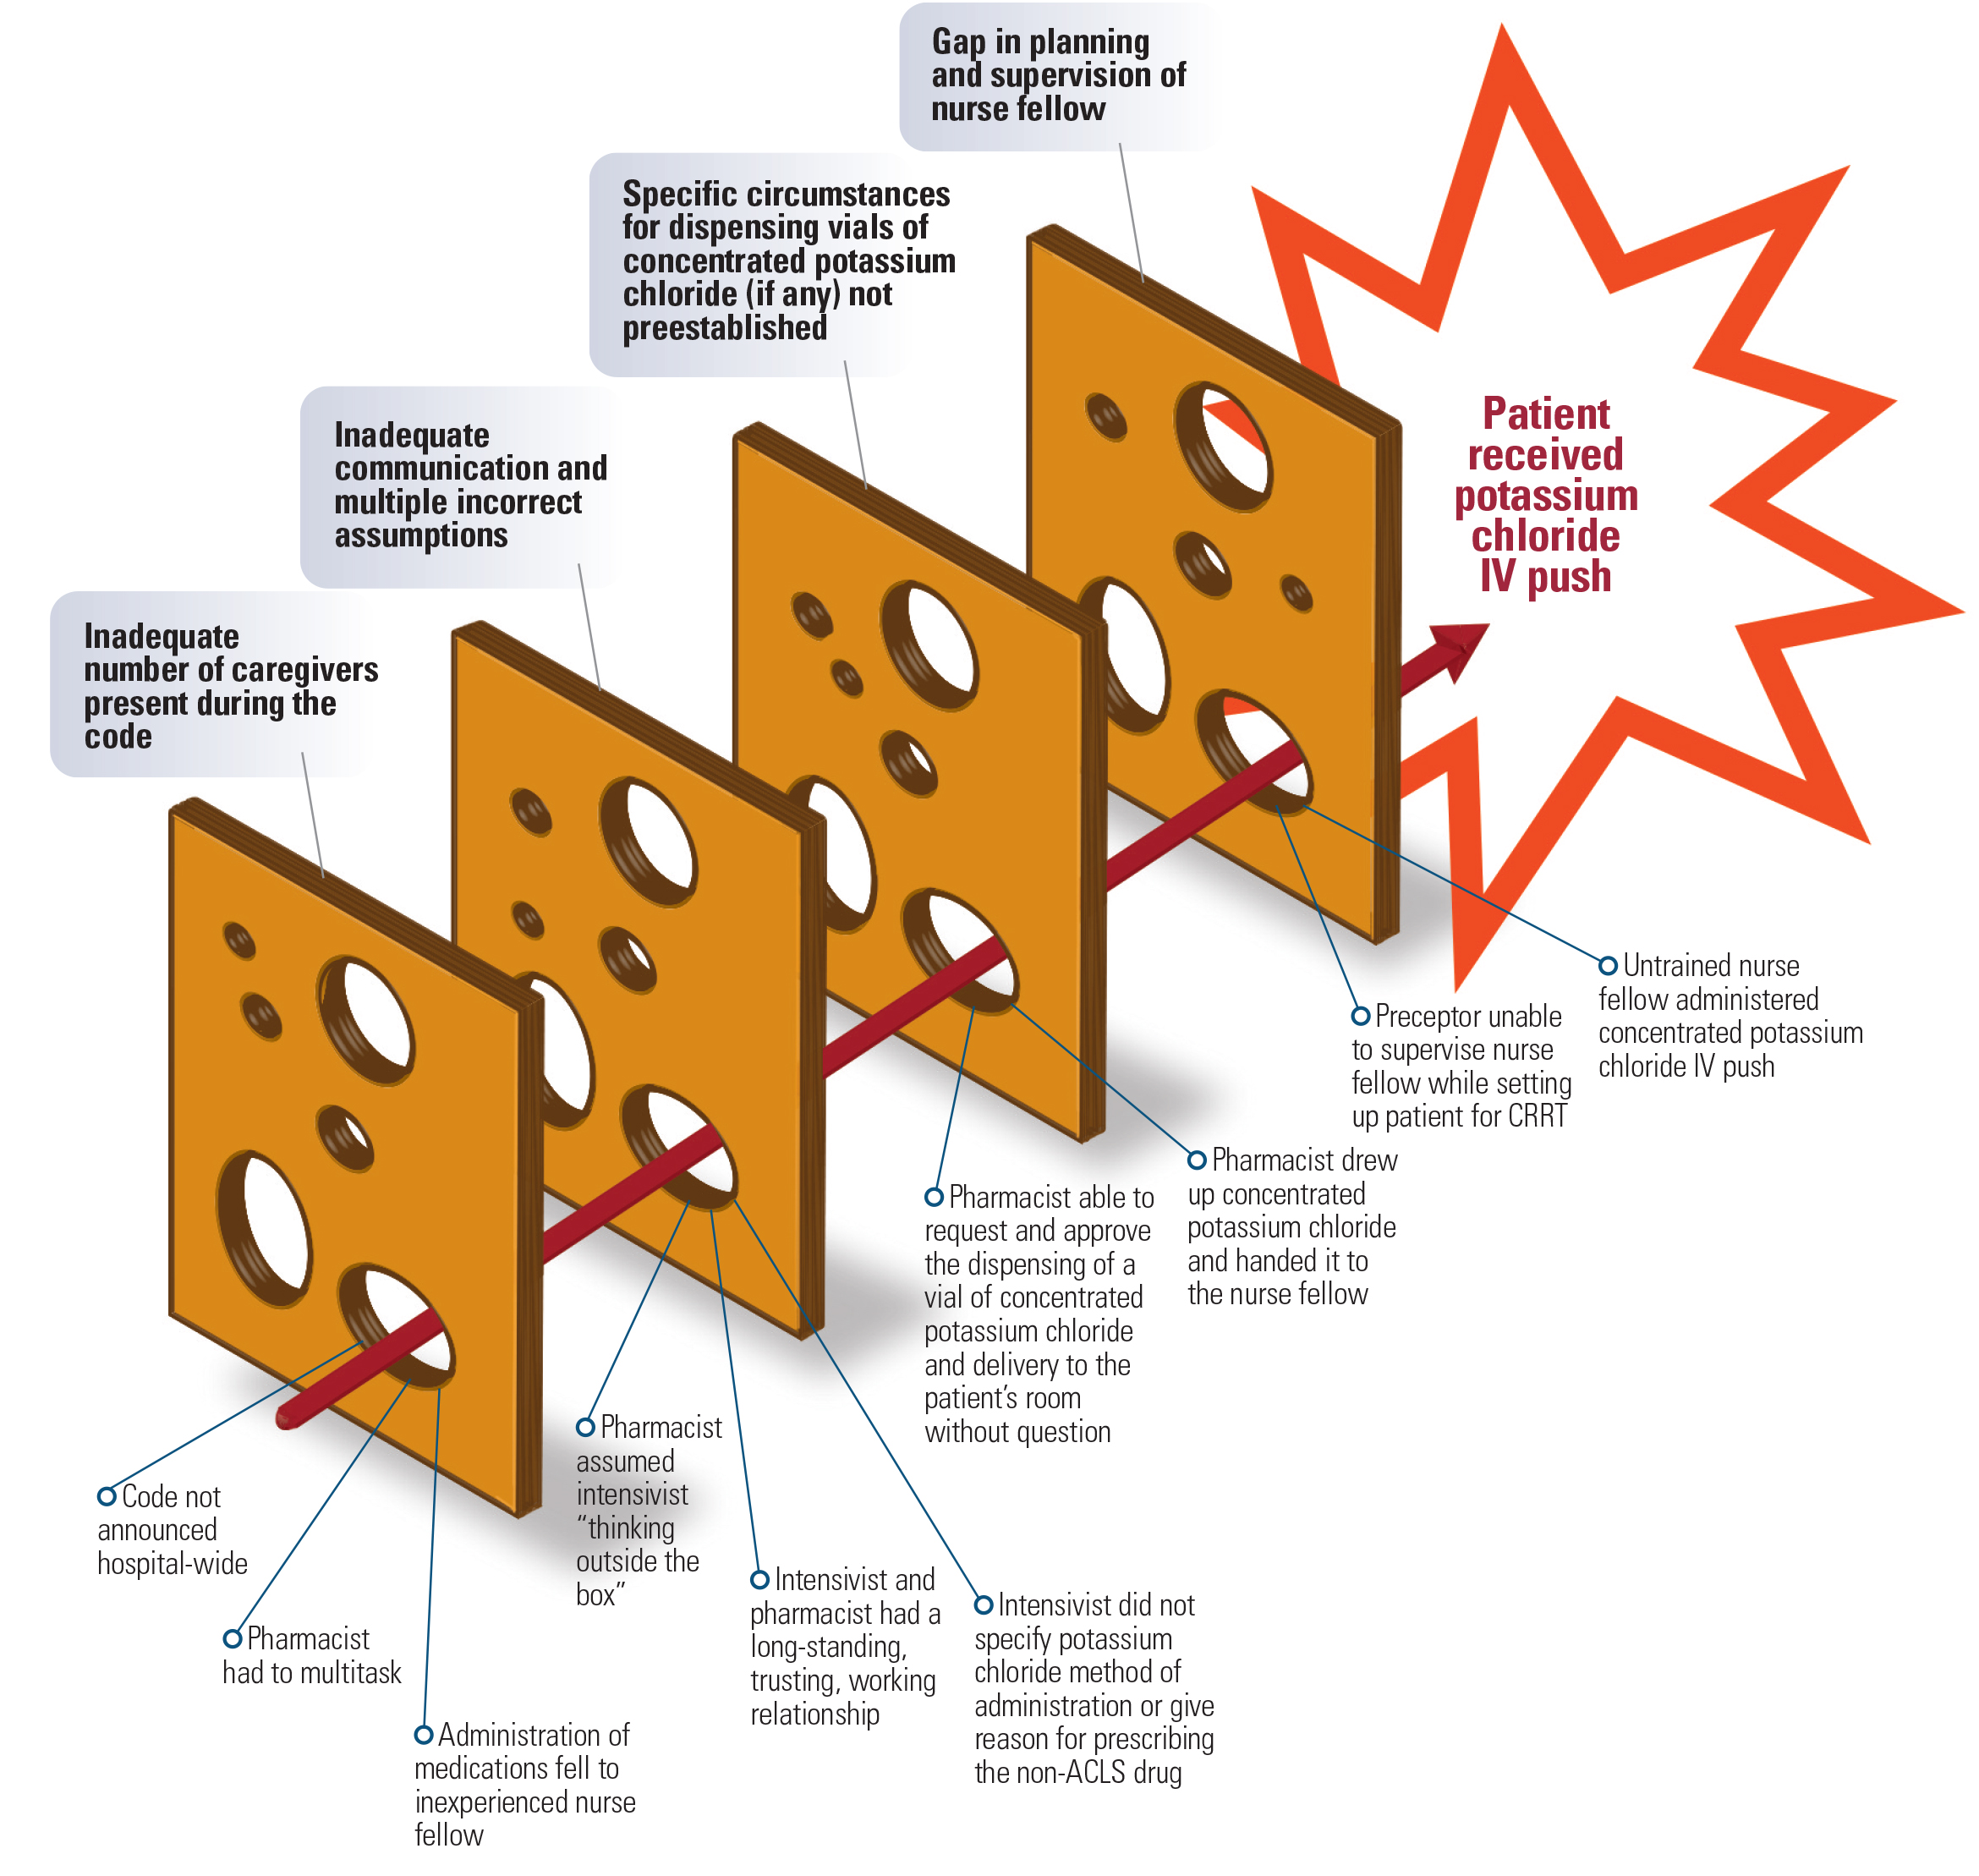 Figure 1. “Swiss cheese” model diagramming how and why the error happened.